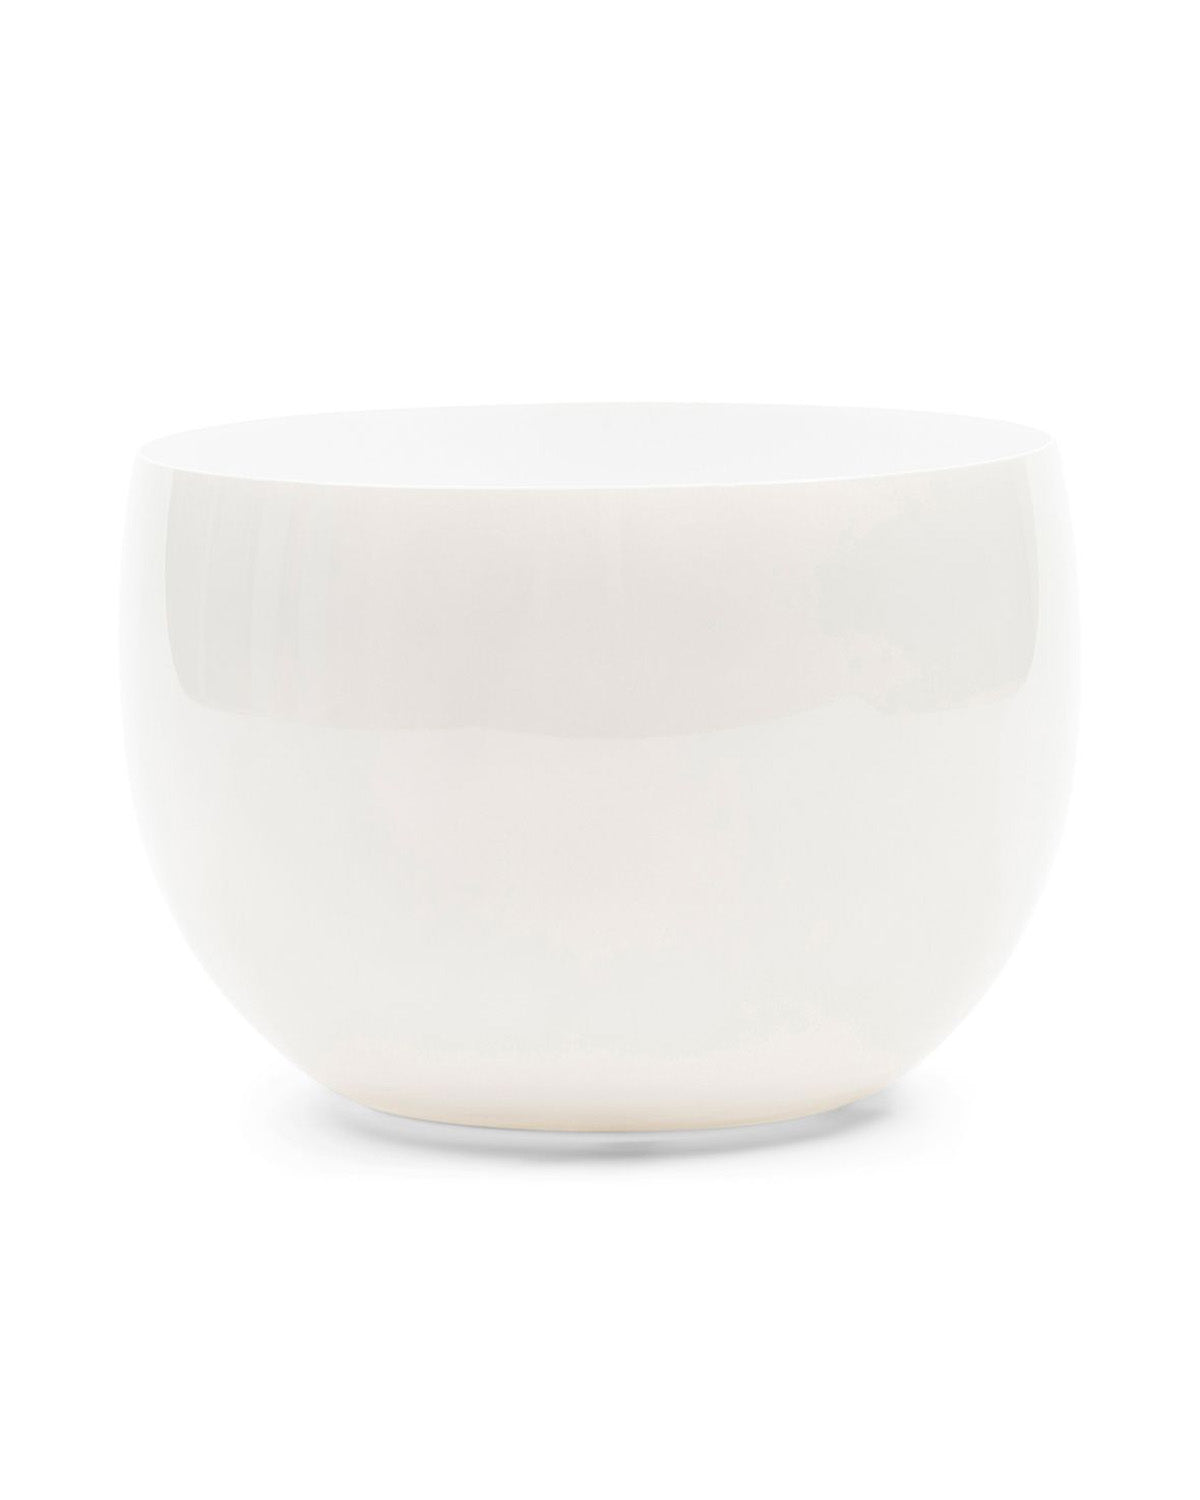 Softly rounded glass bowl in color white by Riviera Maison